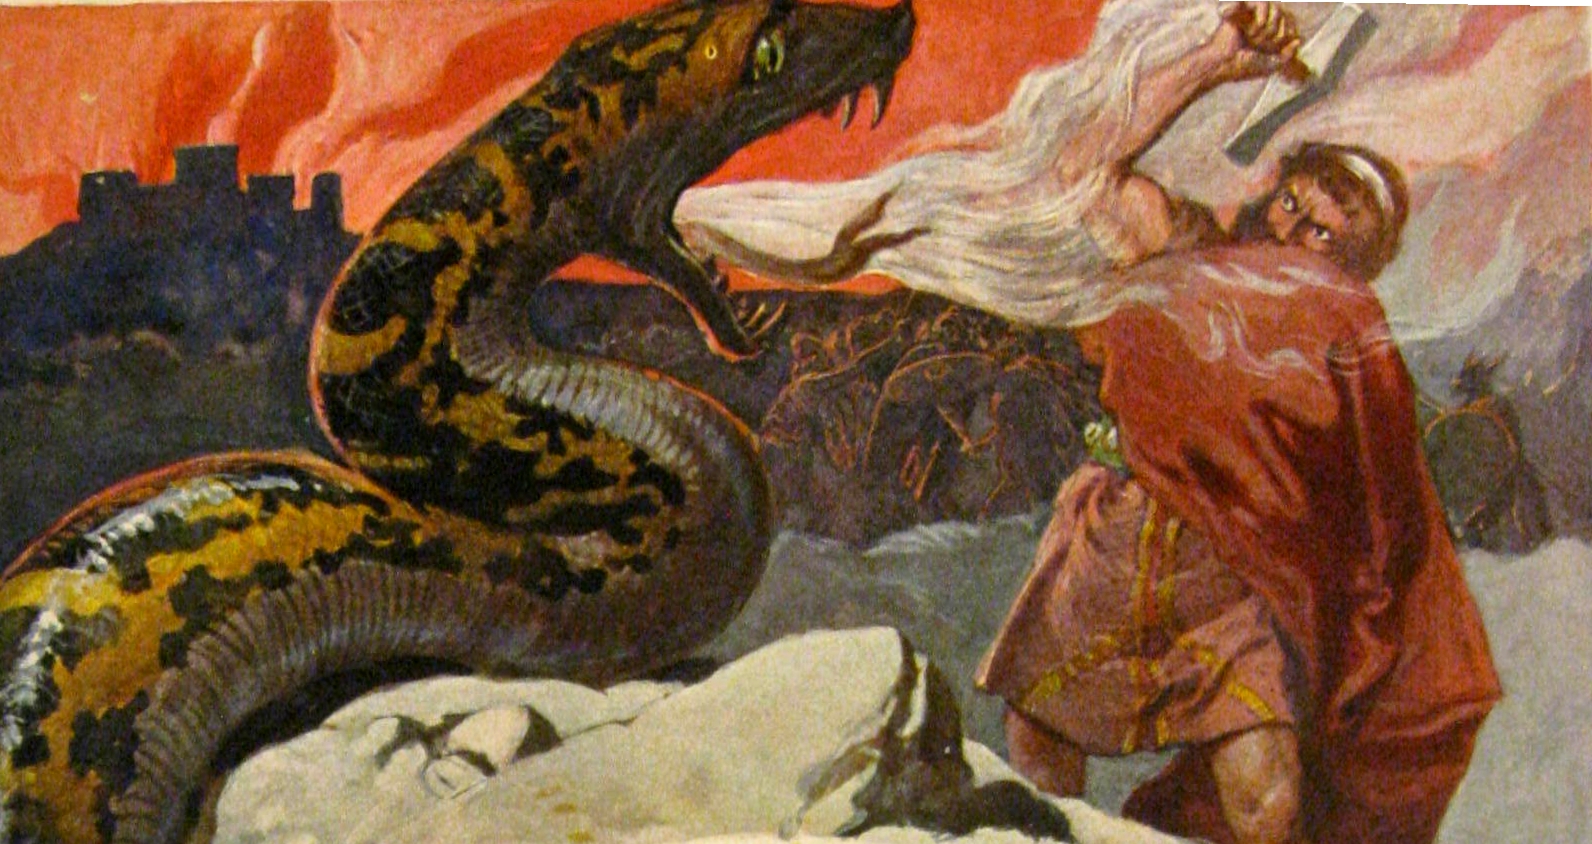 A vicious and fiery snake confronts a man who attacks the snake with defence.